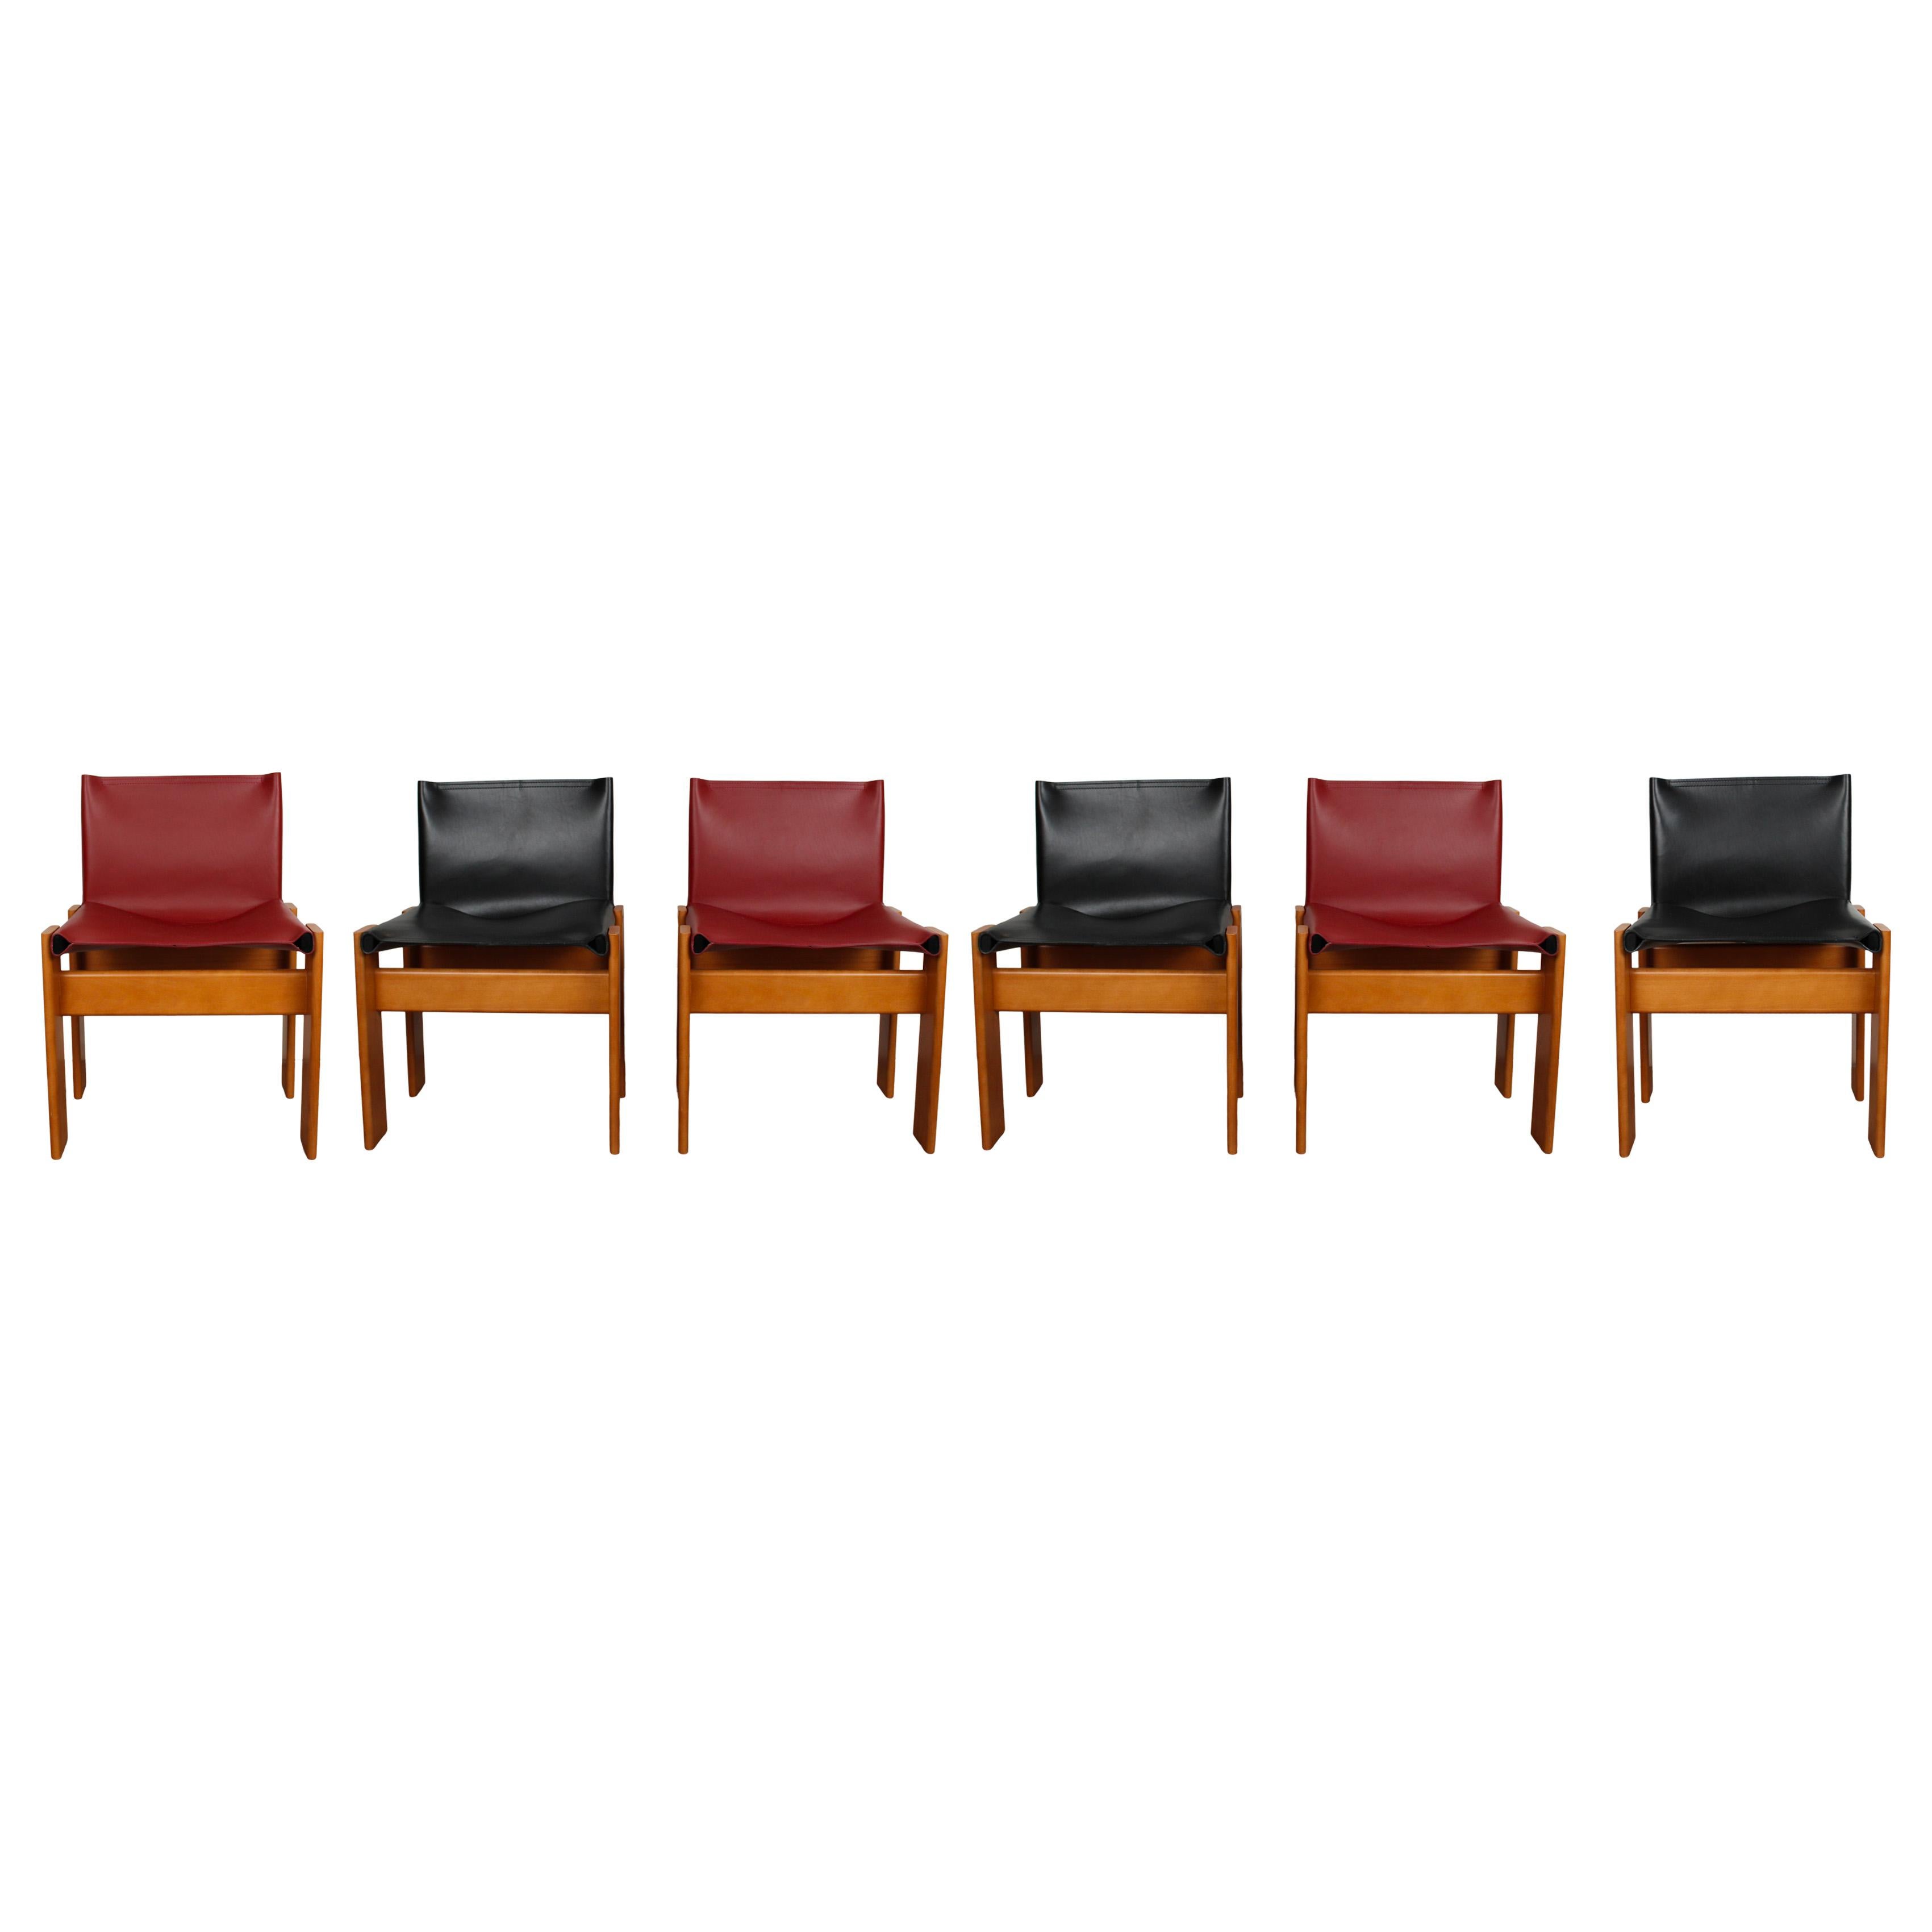 Set of six “Monk” dining chairs designed by Afra and Tobia Scarpa for Molteni in 1973.
Made of English red and black leather and walnut.
Fully restored in Italy.

Interesting is the ‘flat’ shape of this chair where the designer has chosen to place